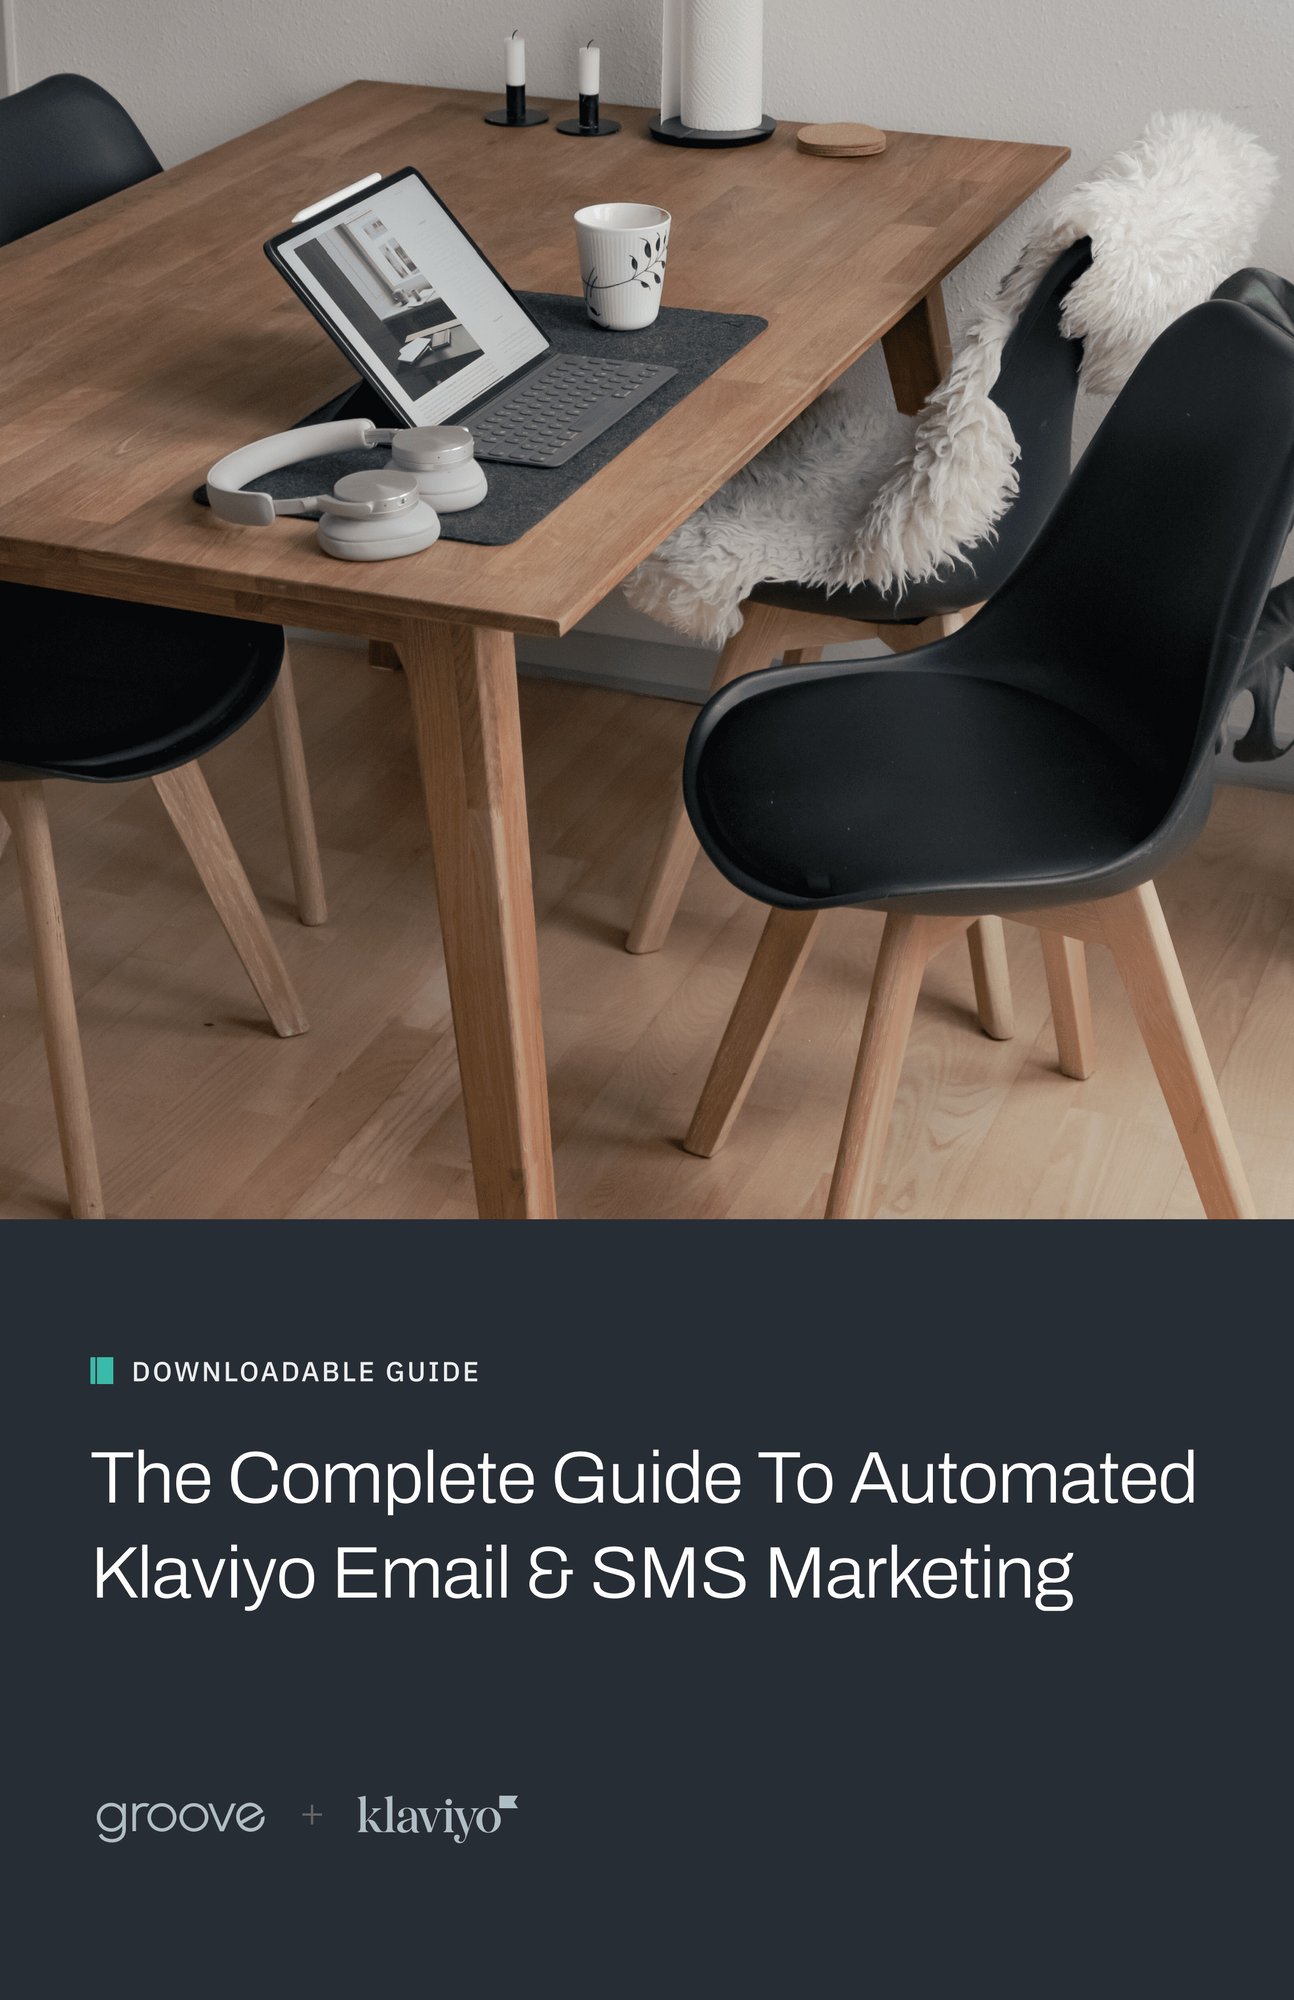 Klaviyo Email Marketing (+SMS) Everything You Need to Know